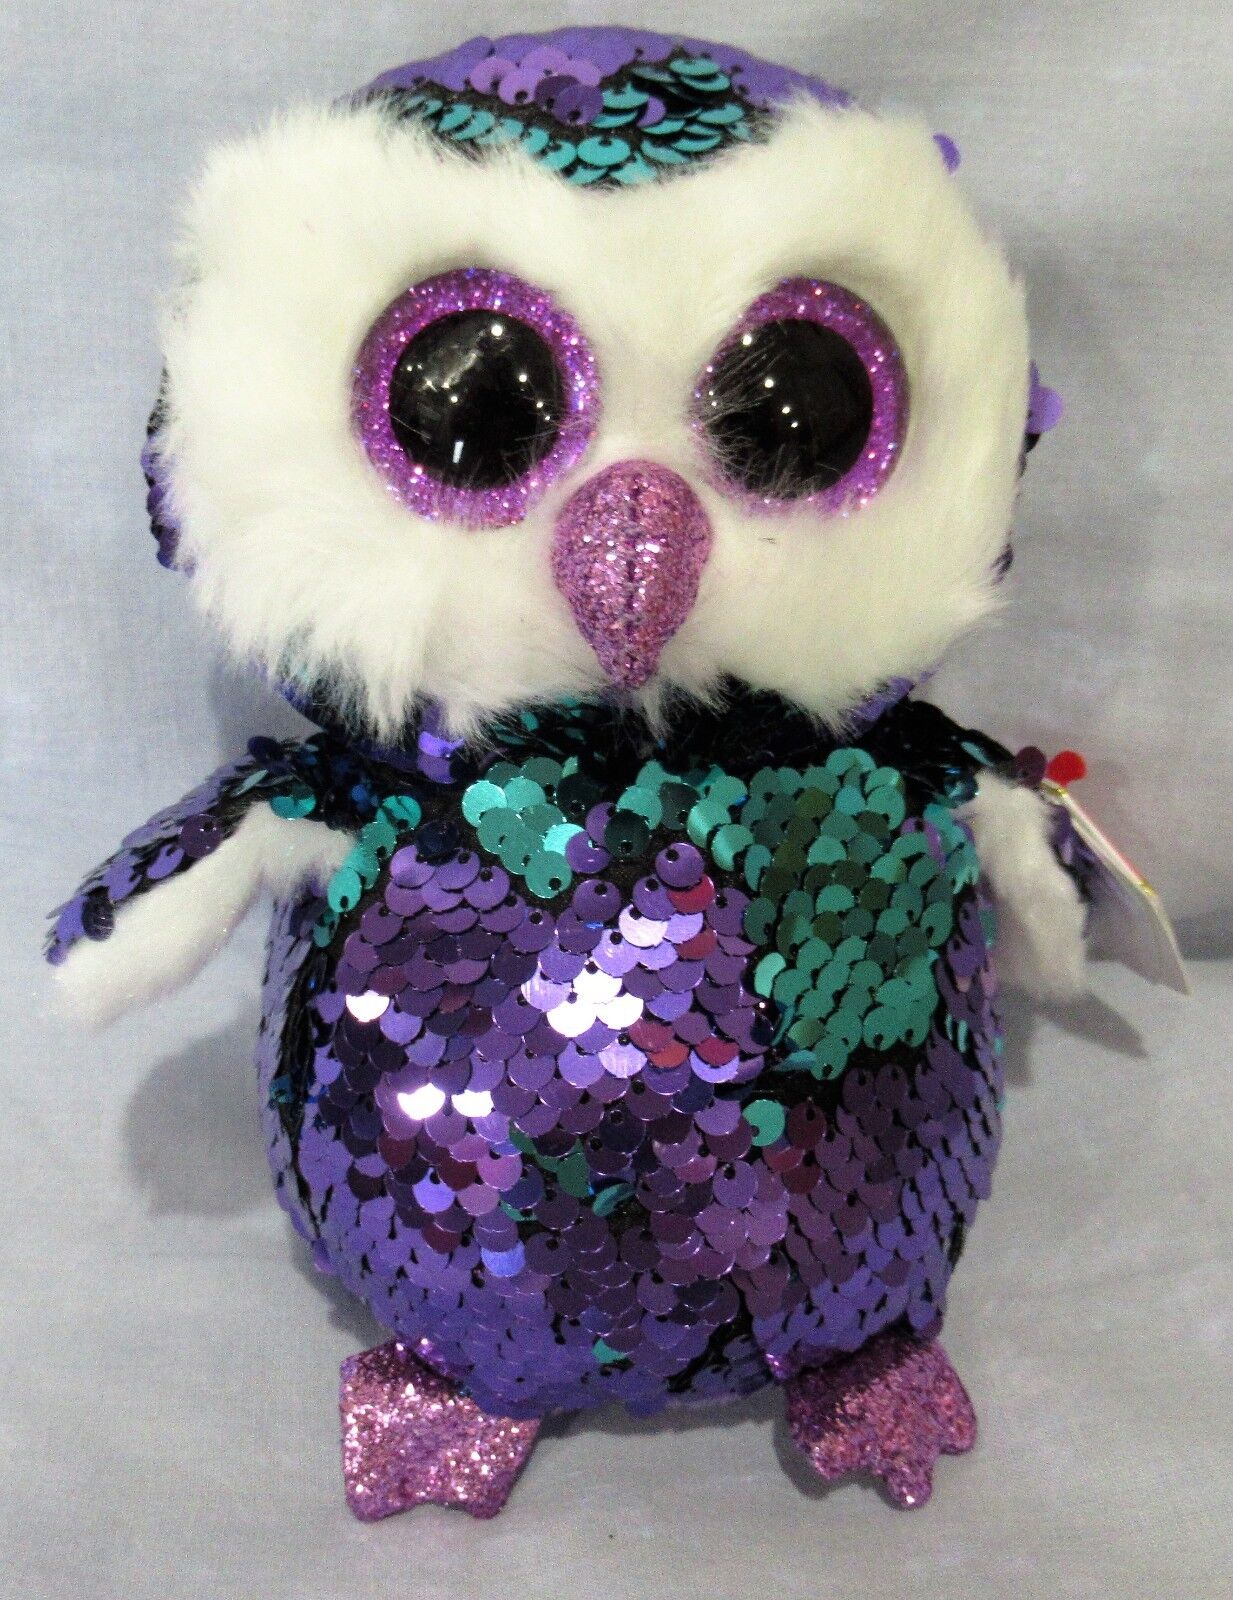 MOONLIGHT - PURPLE OWL - Ty FLIPPABLES Sequin Beanie 6" Boos  NEW with MINT TAGS Ty